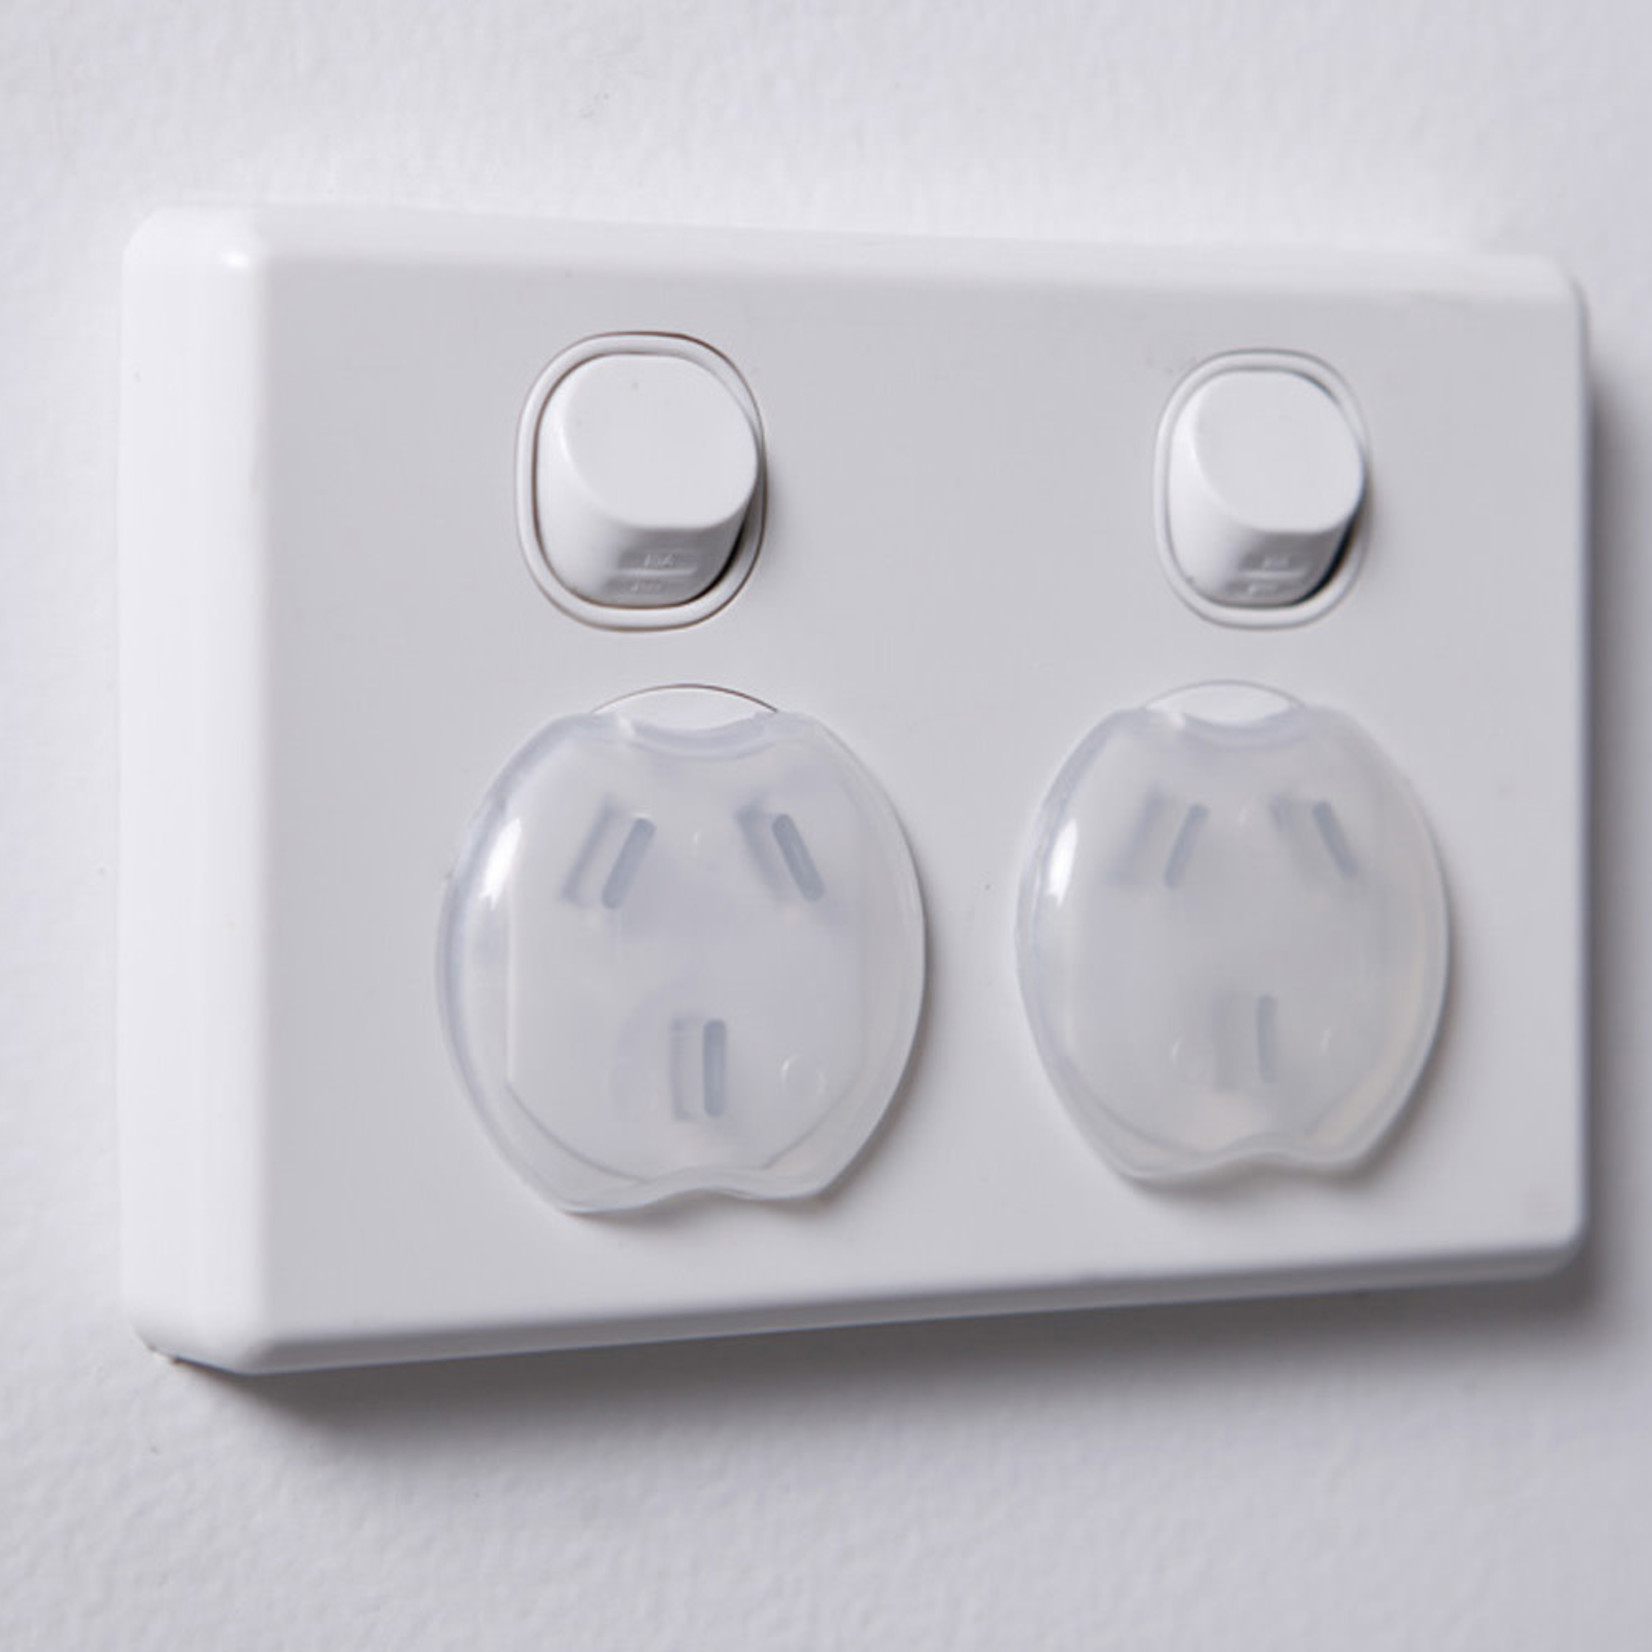 Dreambaby OUTLET PLUGS 12 PACK